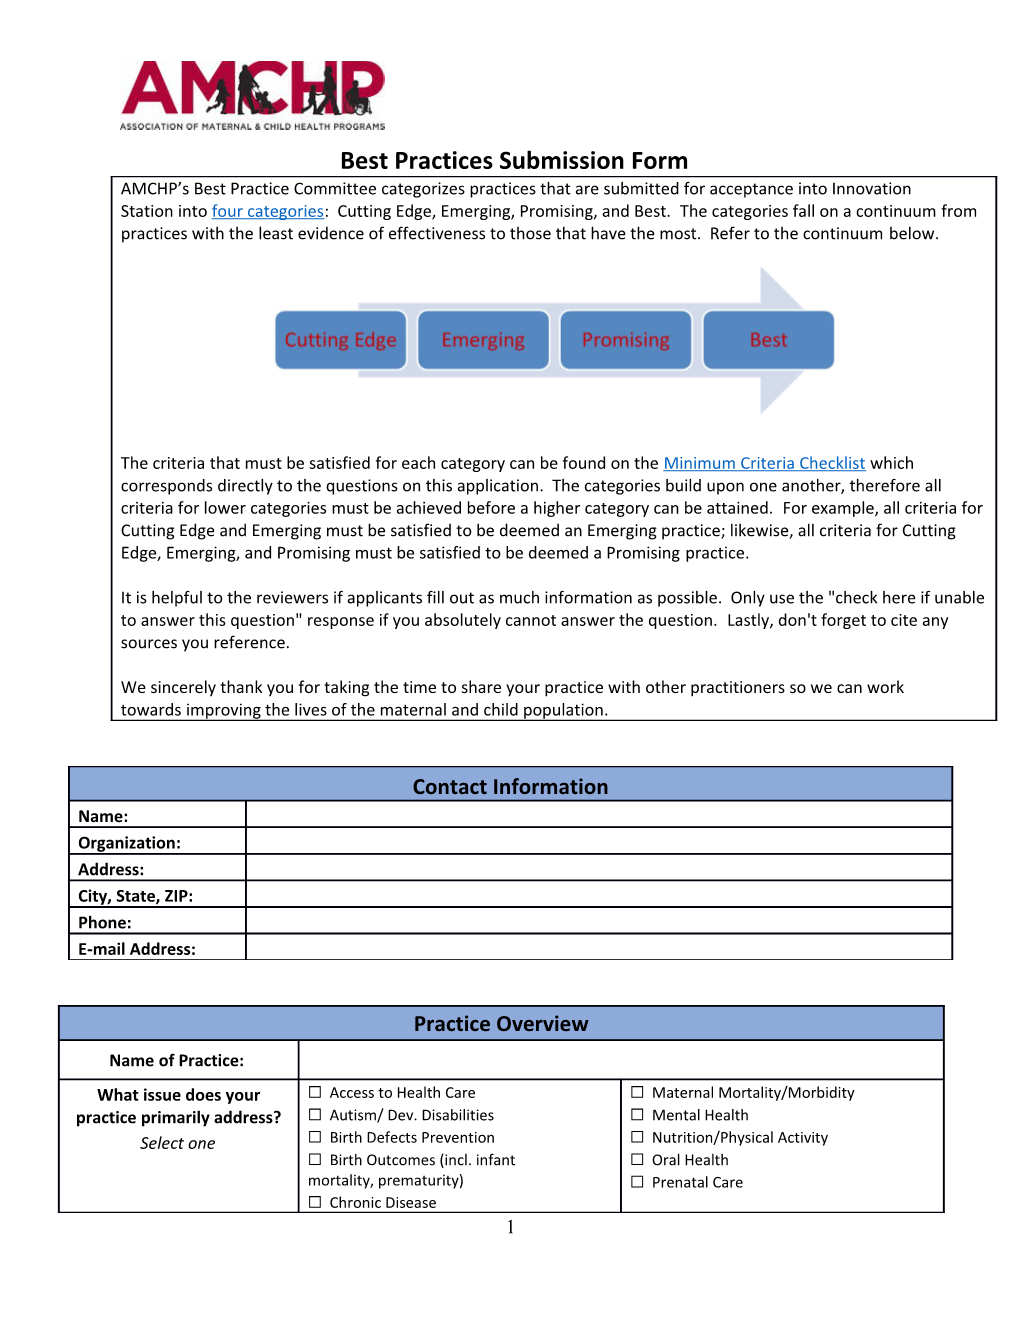 Best Practices Submission Form